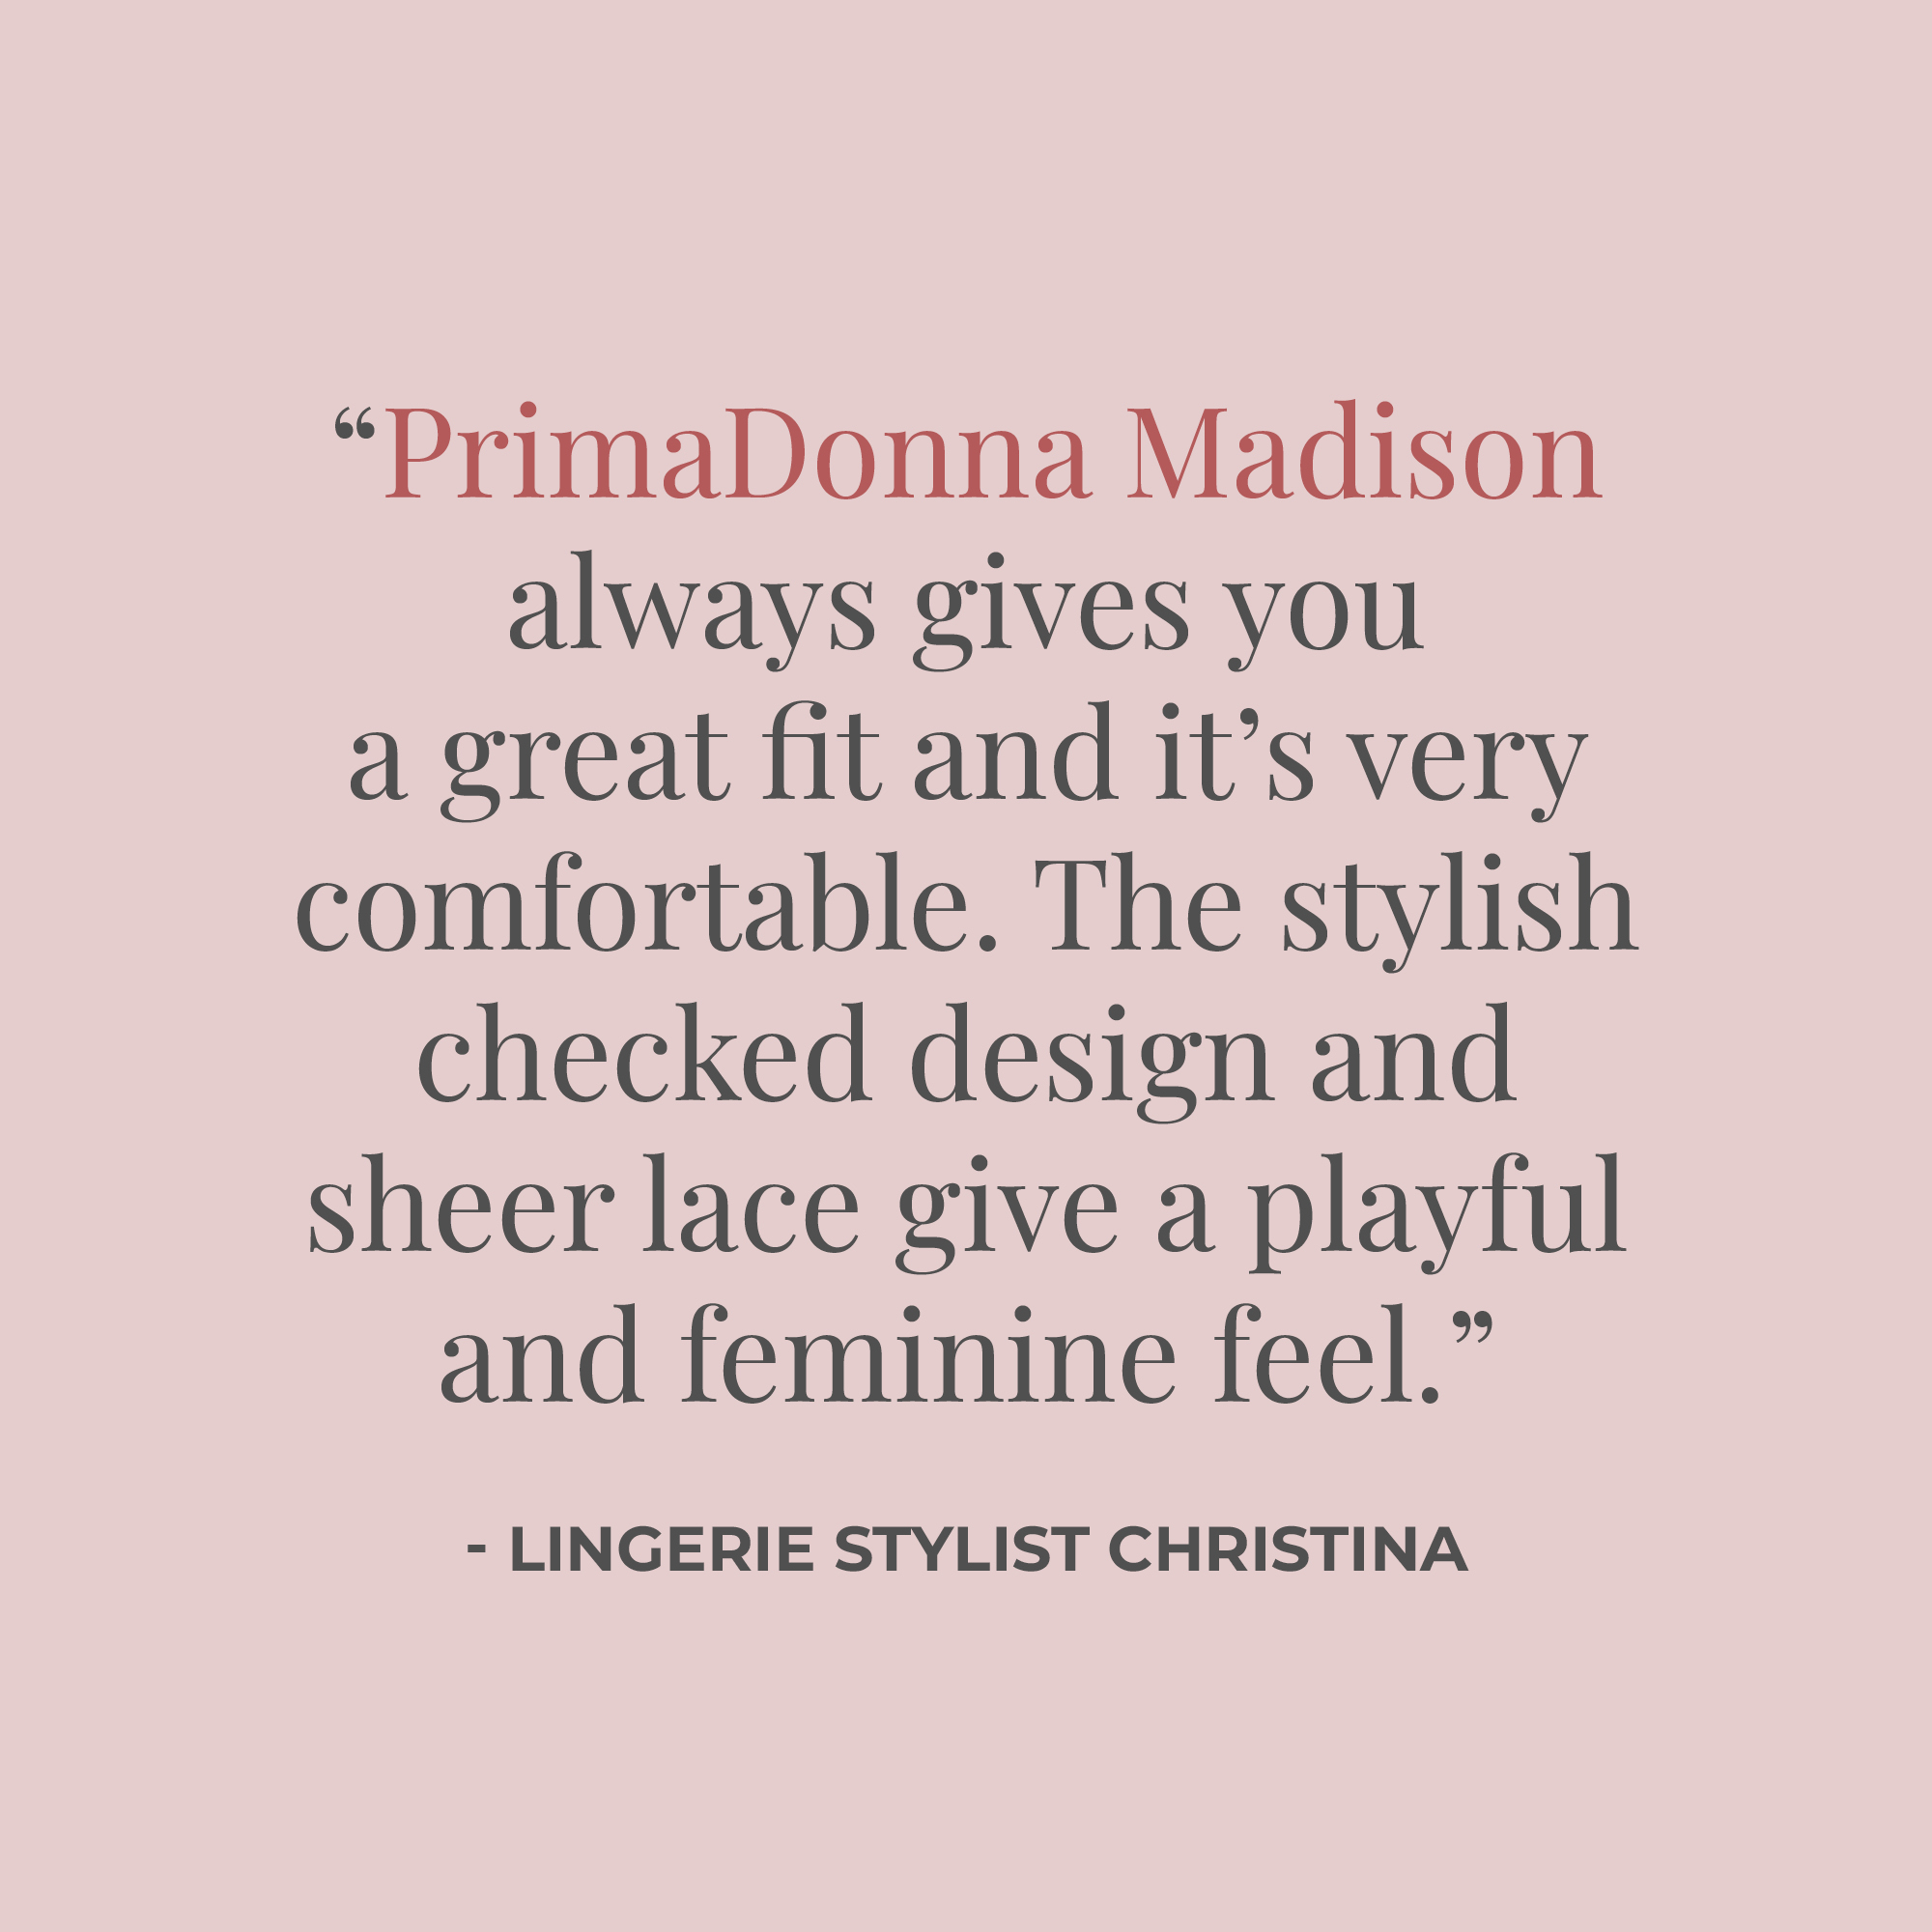 Rigby & Peller US - Your Lingerie Wardrobe (for the holidays & always)  should include smooth pieces that look seamless under your clothes. Our  wardrobe must-have today is the PrimaDonna Twisted collection